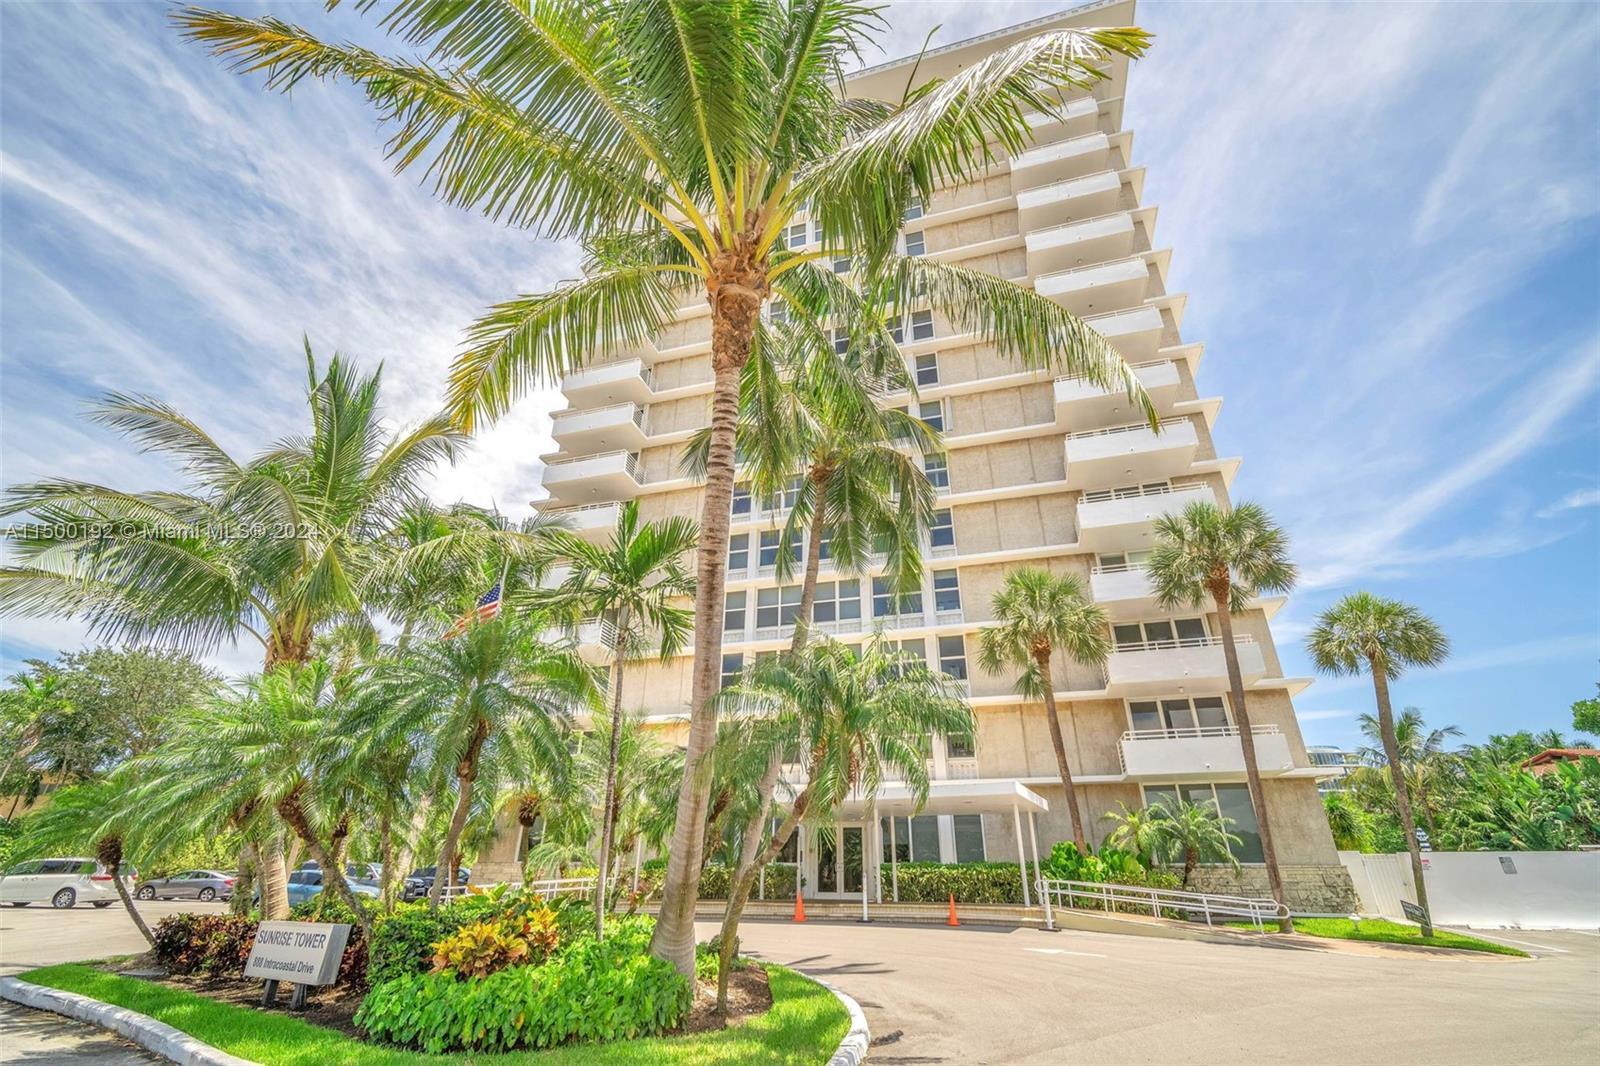 Photo of 888 Intracoastal Dr #3A in Fort Lauderdale, FL